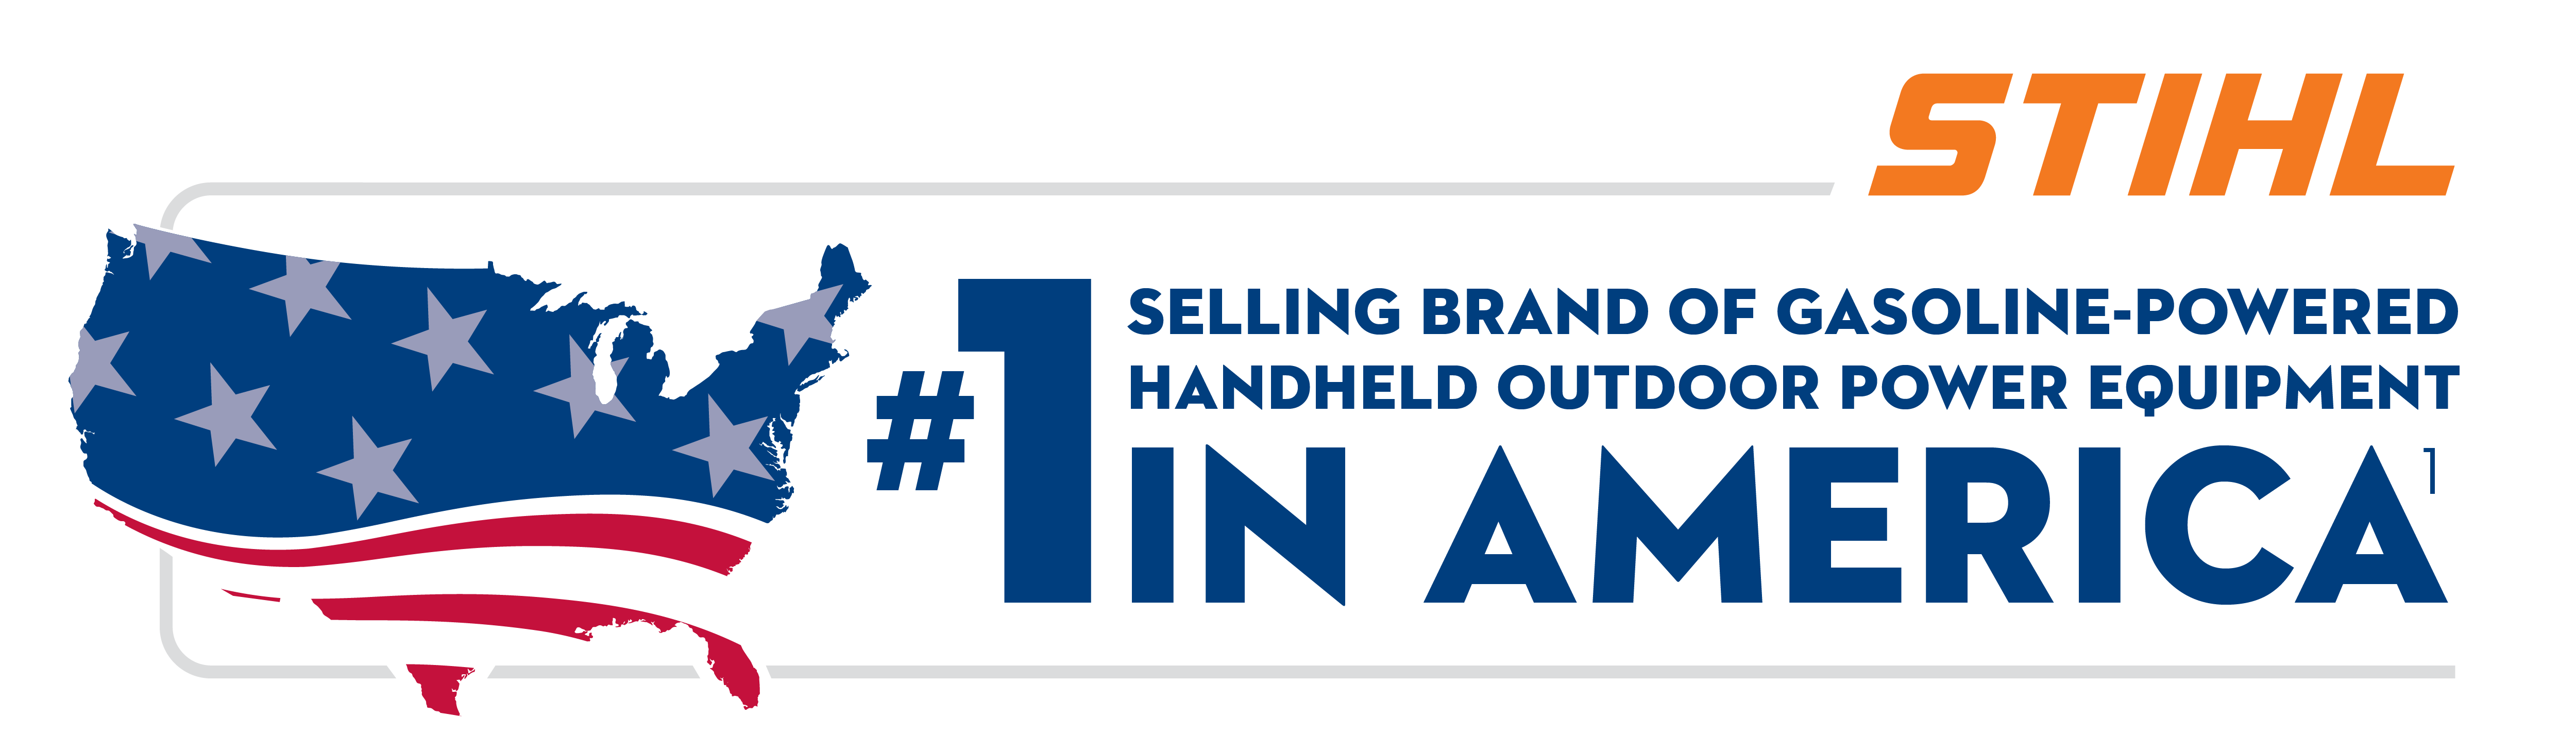 Number one selling brand of gasoline-powered handheld outdoor power equipment in America